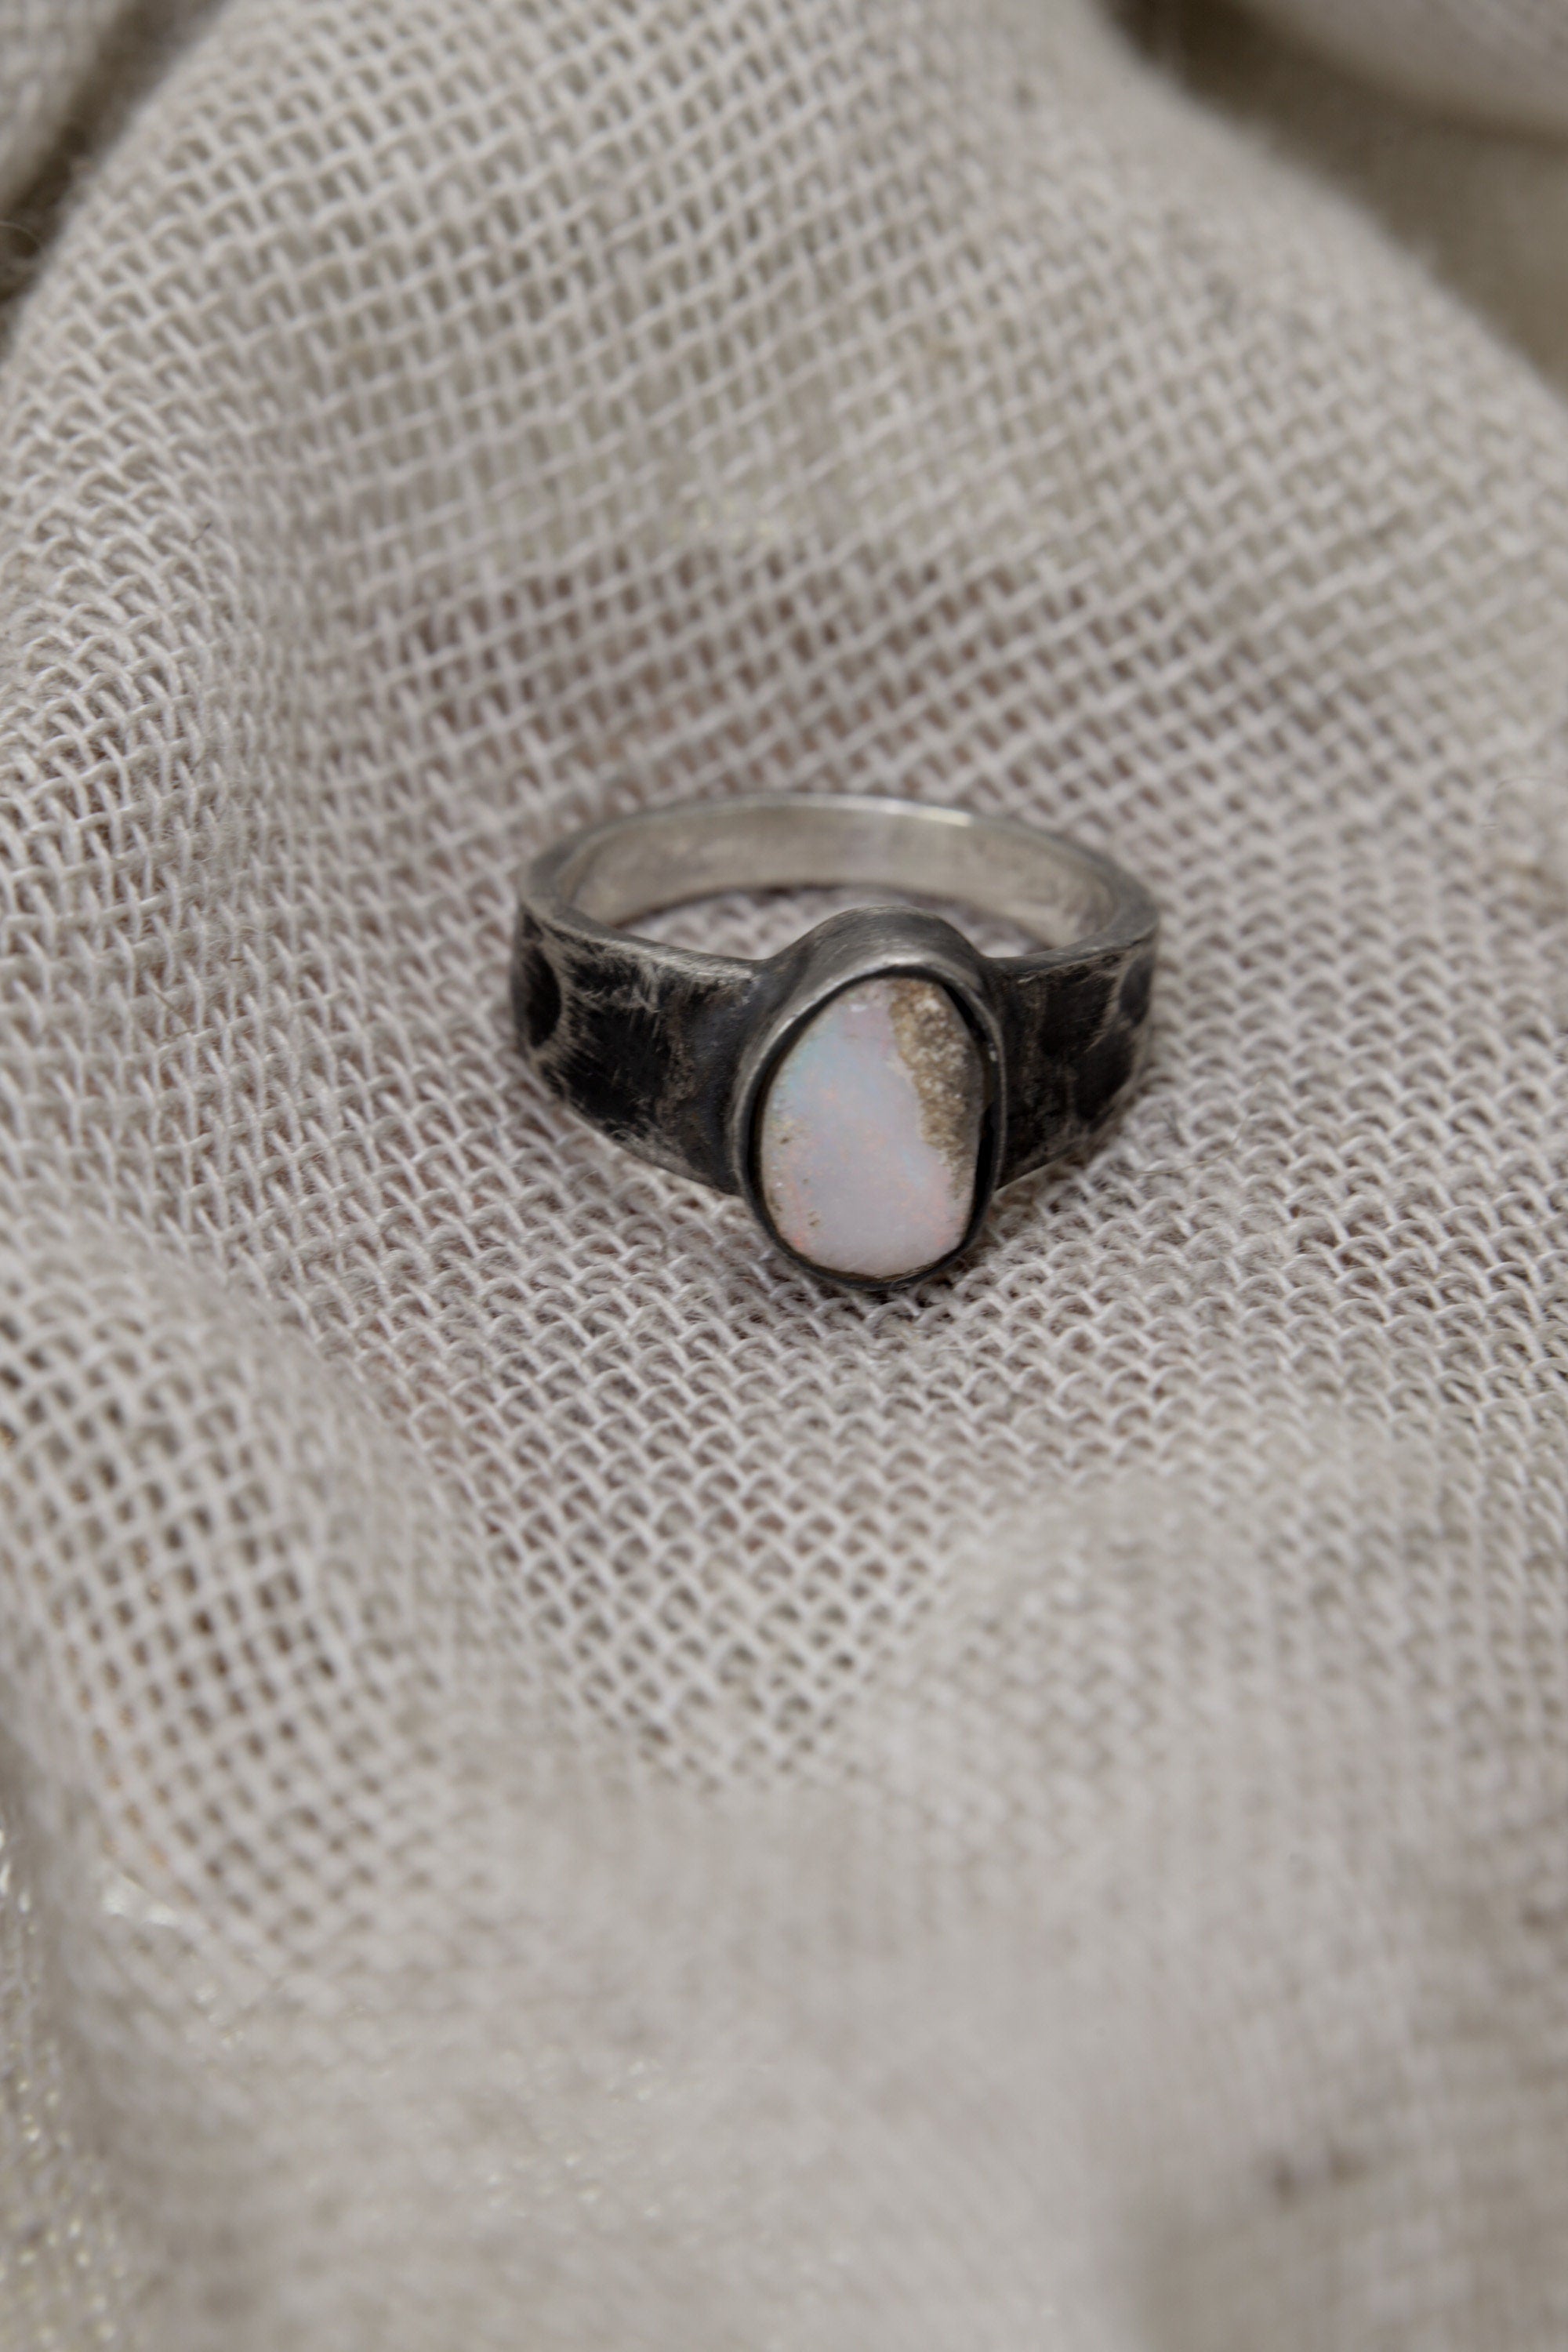 Iridescent Dream: Sterling Silver Ring with Lightning Ridge Gem Opal - Textured & Oxidised - Size 6 - NO/02